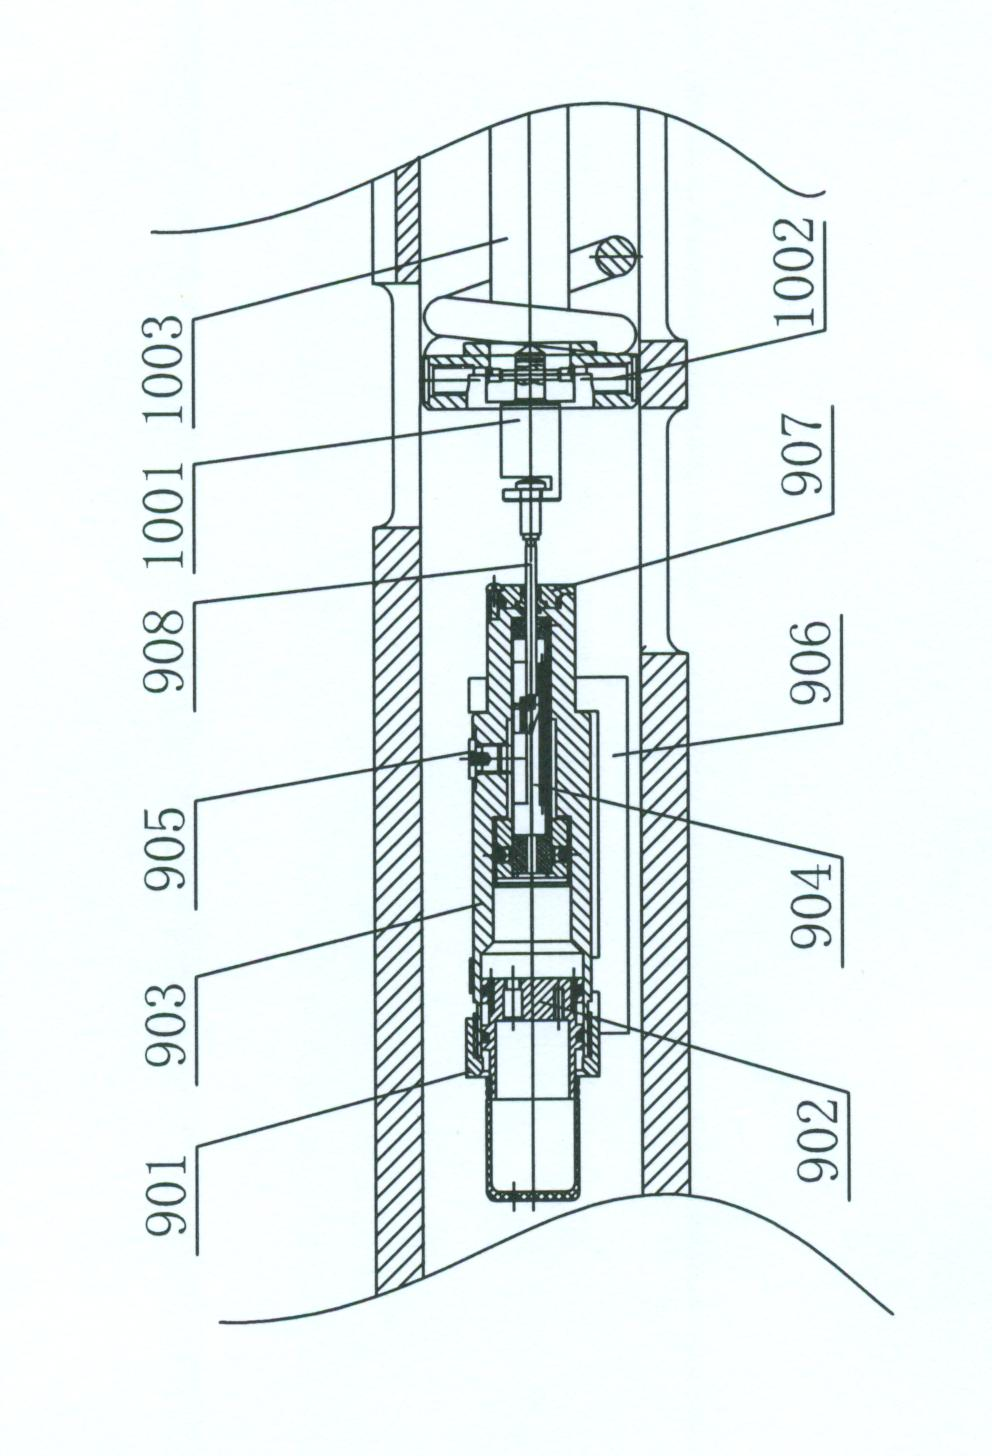 Microsphere logging instrument sidewall contact device